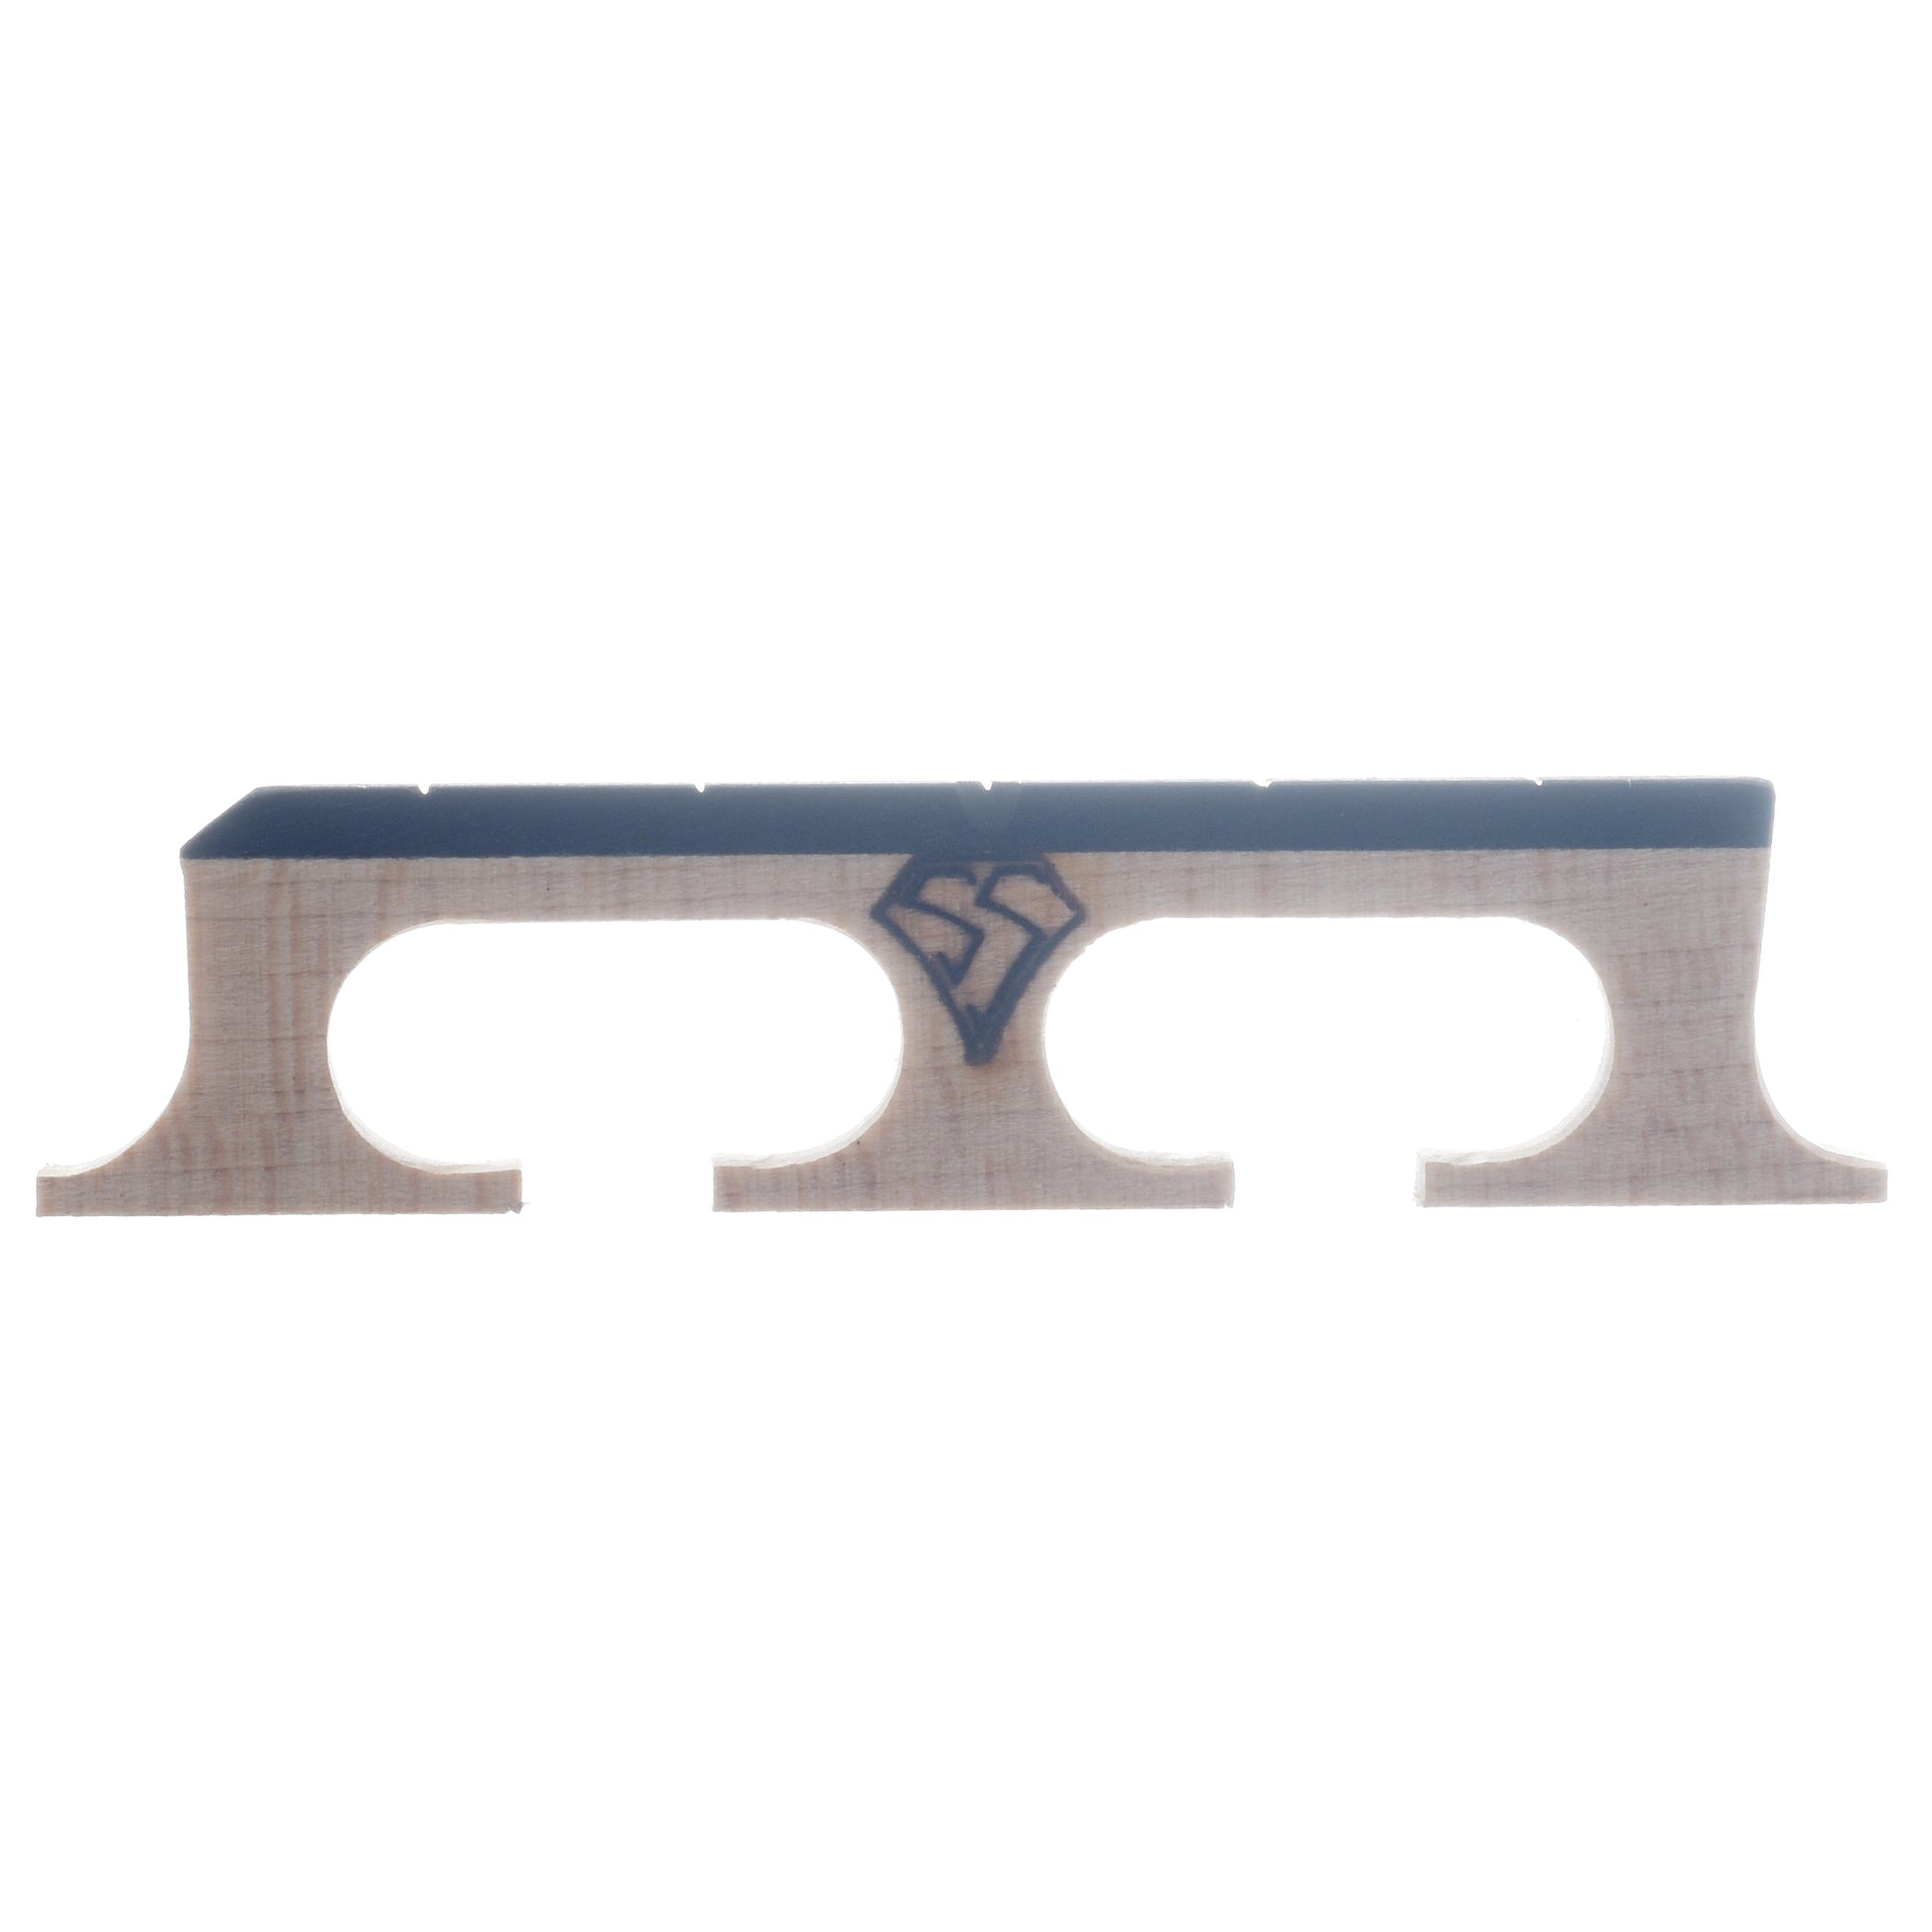 Image 2 of Snuffy Smith New Generation Banjo Bridge, Compensated 11/16" Crowe Spaced - SKU# SSCOMP-11/16-C : Product Type Accessories & Parts : Elderly Instruments